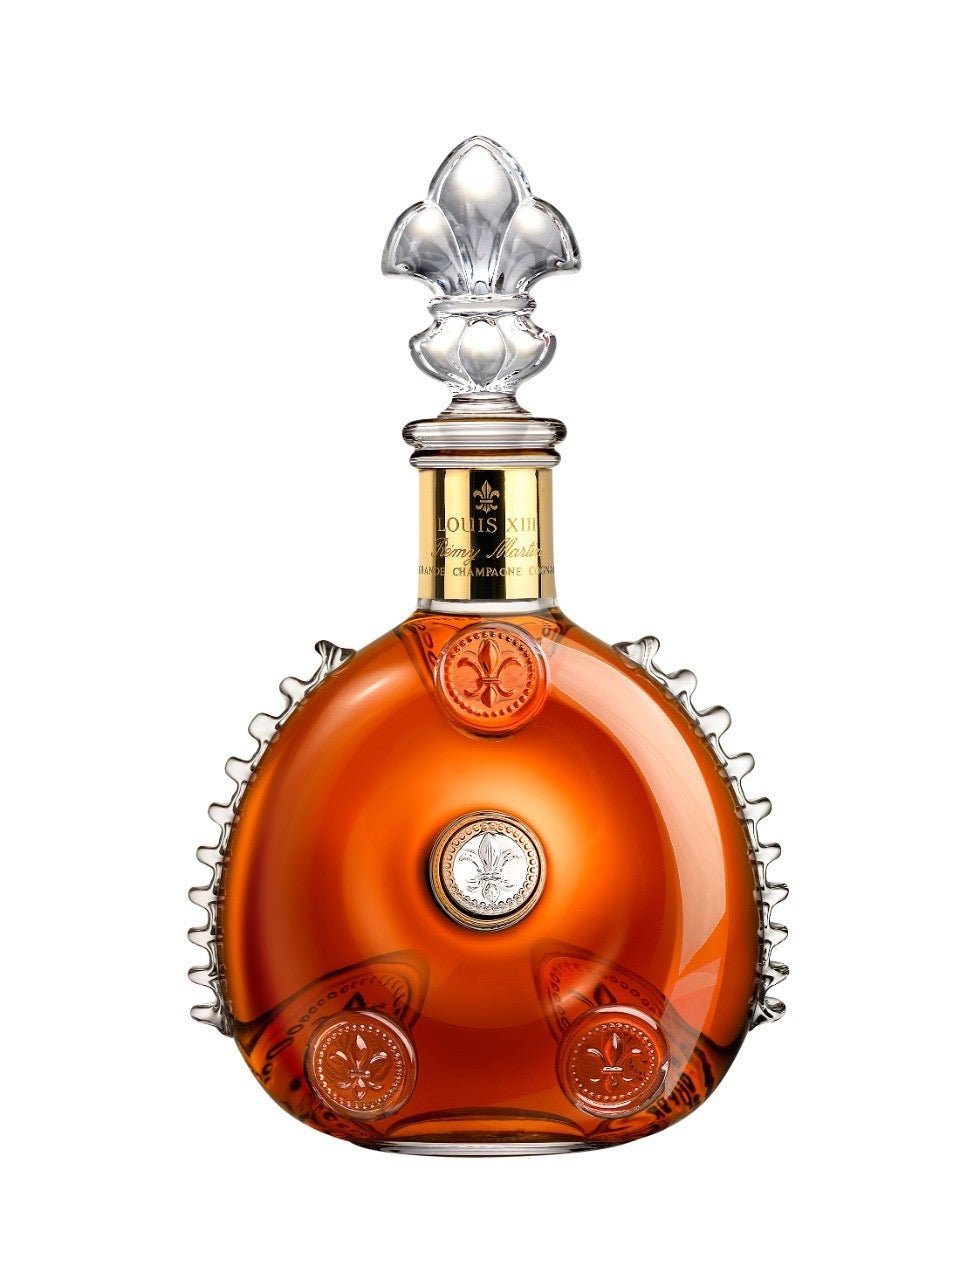 Rémy Martin Louis XIII Cognac | Exquisite Wine & Alcohol Gift Delivery Toronto Canada | Vyno